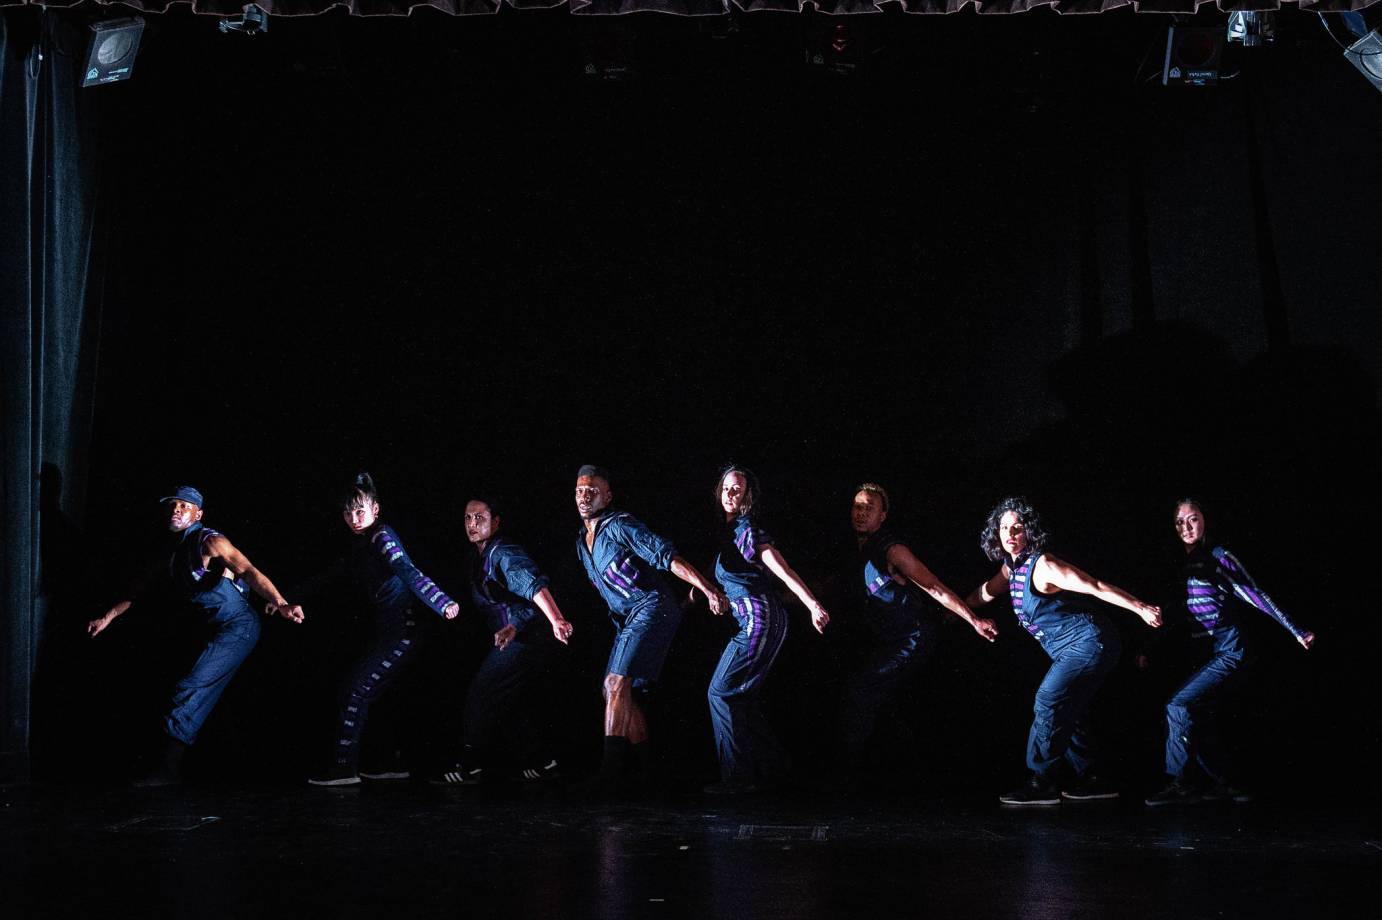 Dancers stand in a line, back arched, knees bent